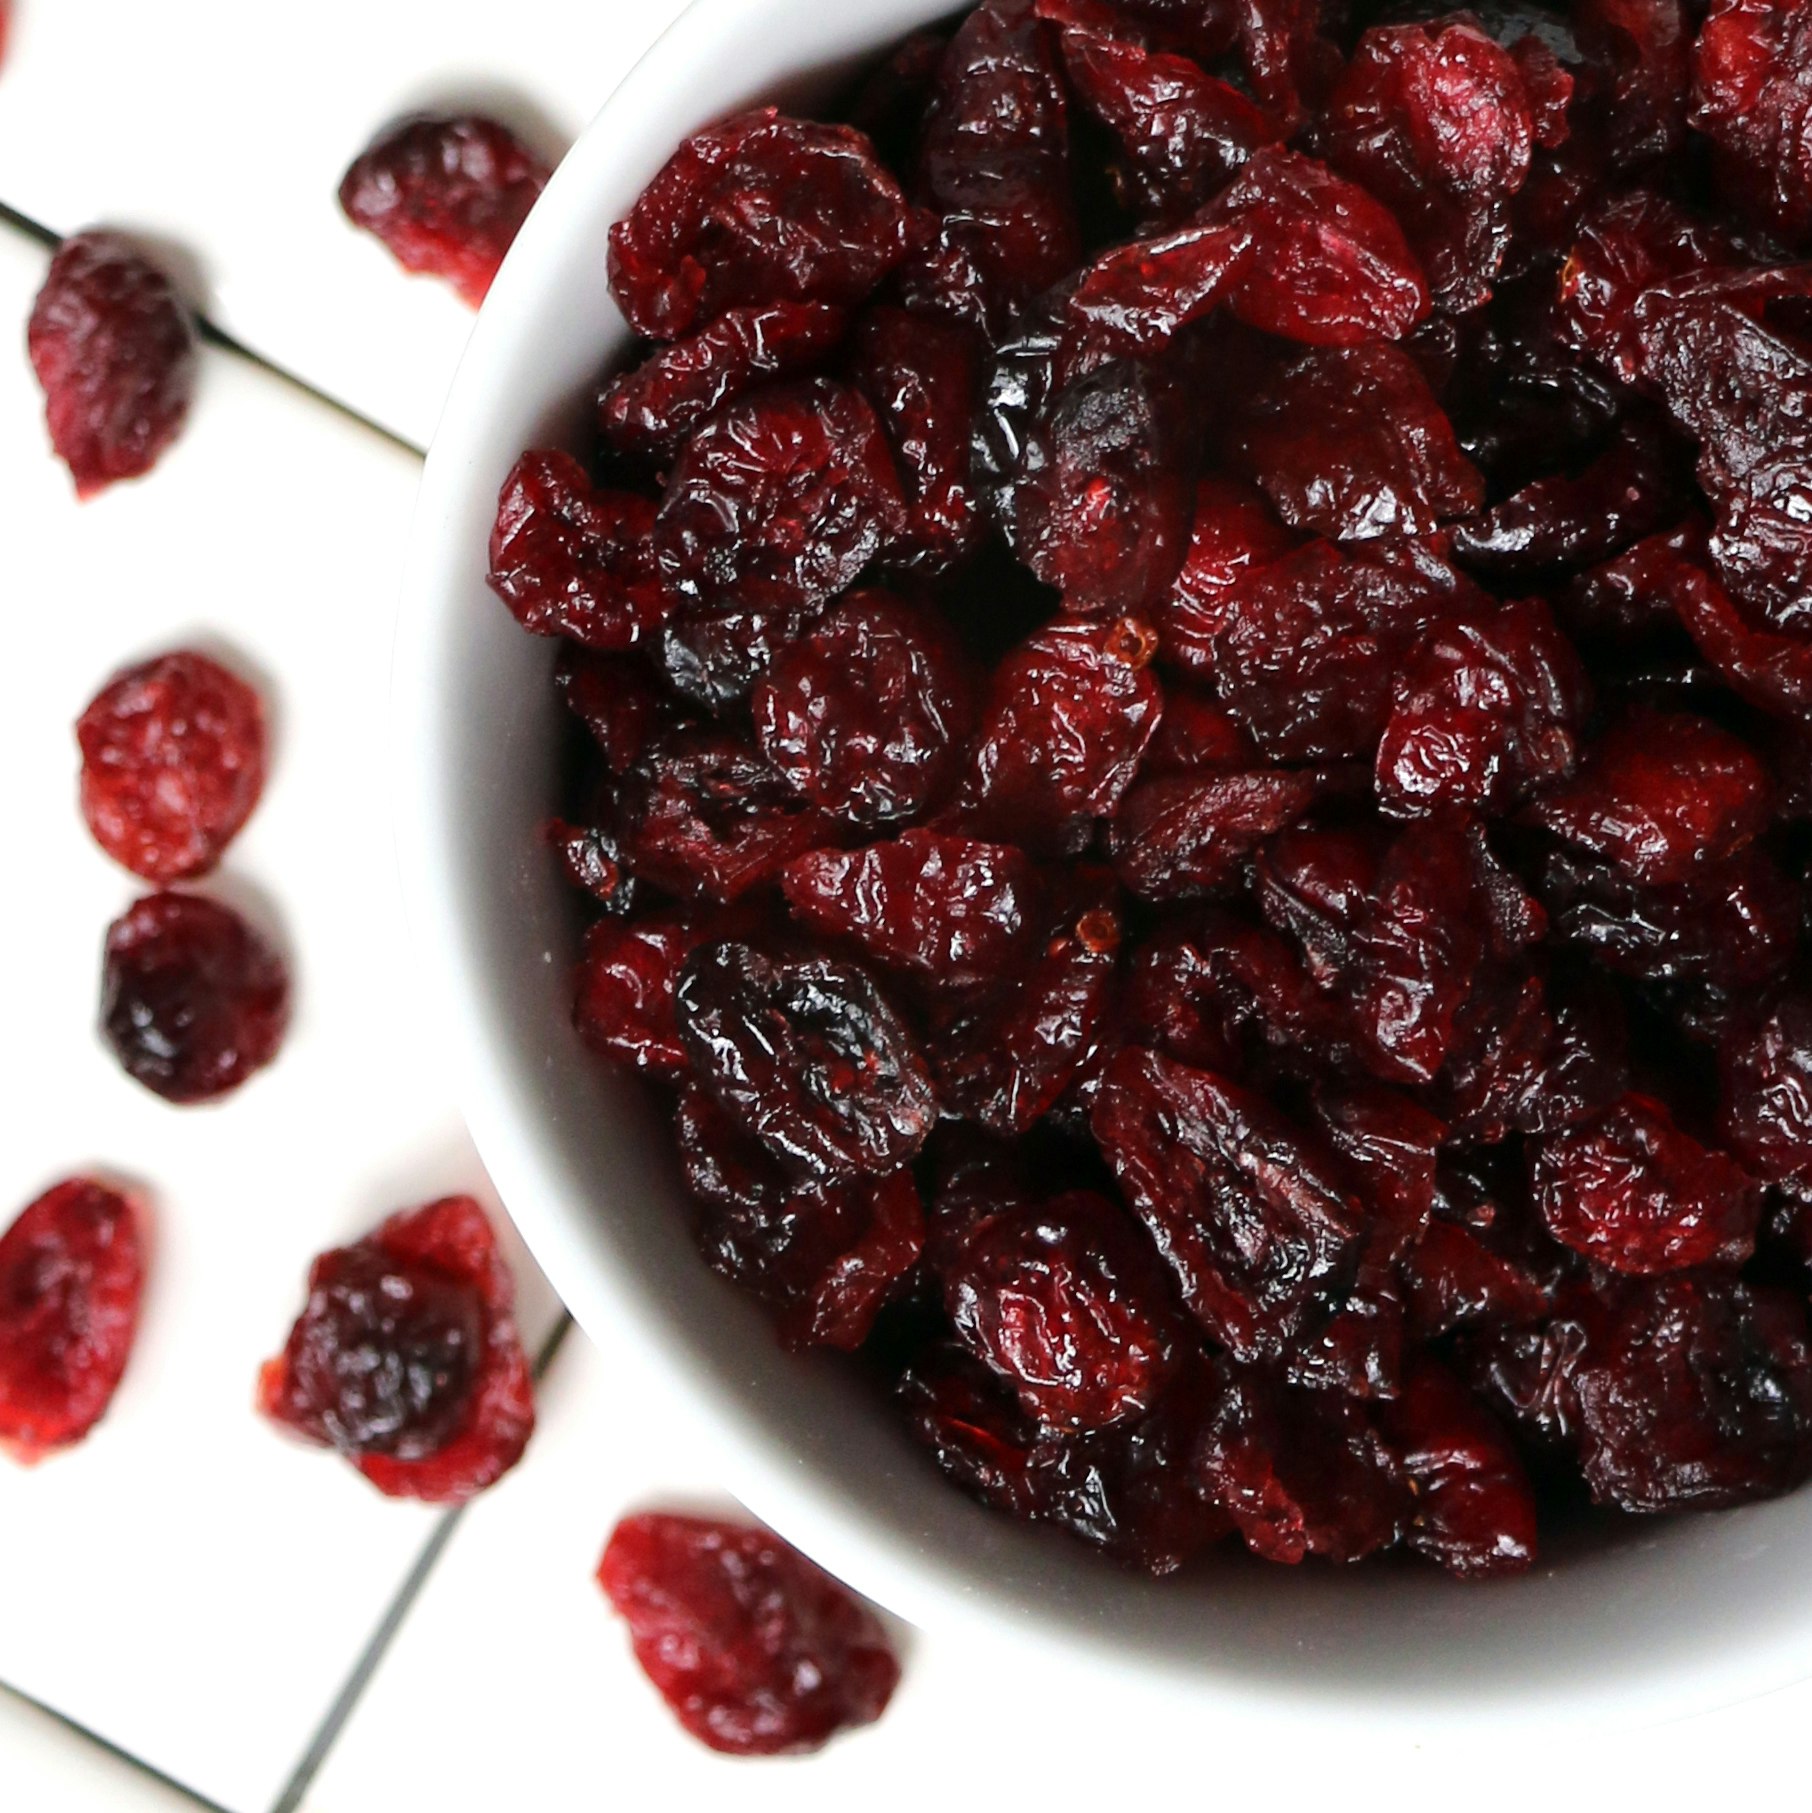 murrays sundried cranberries specialty foods